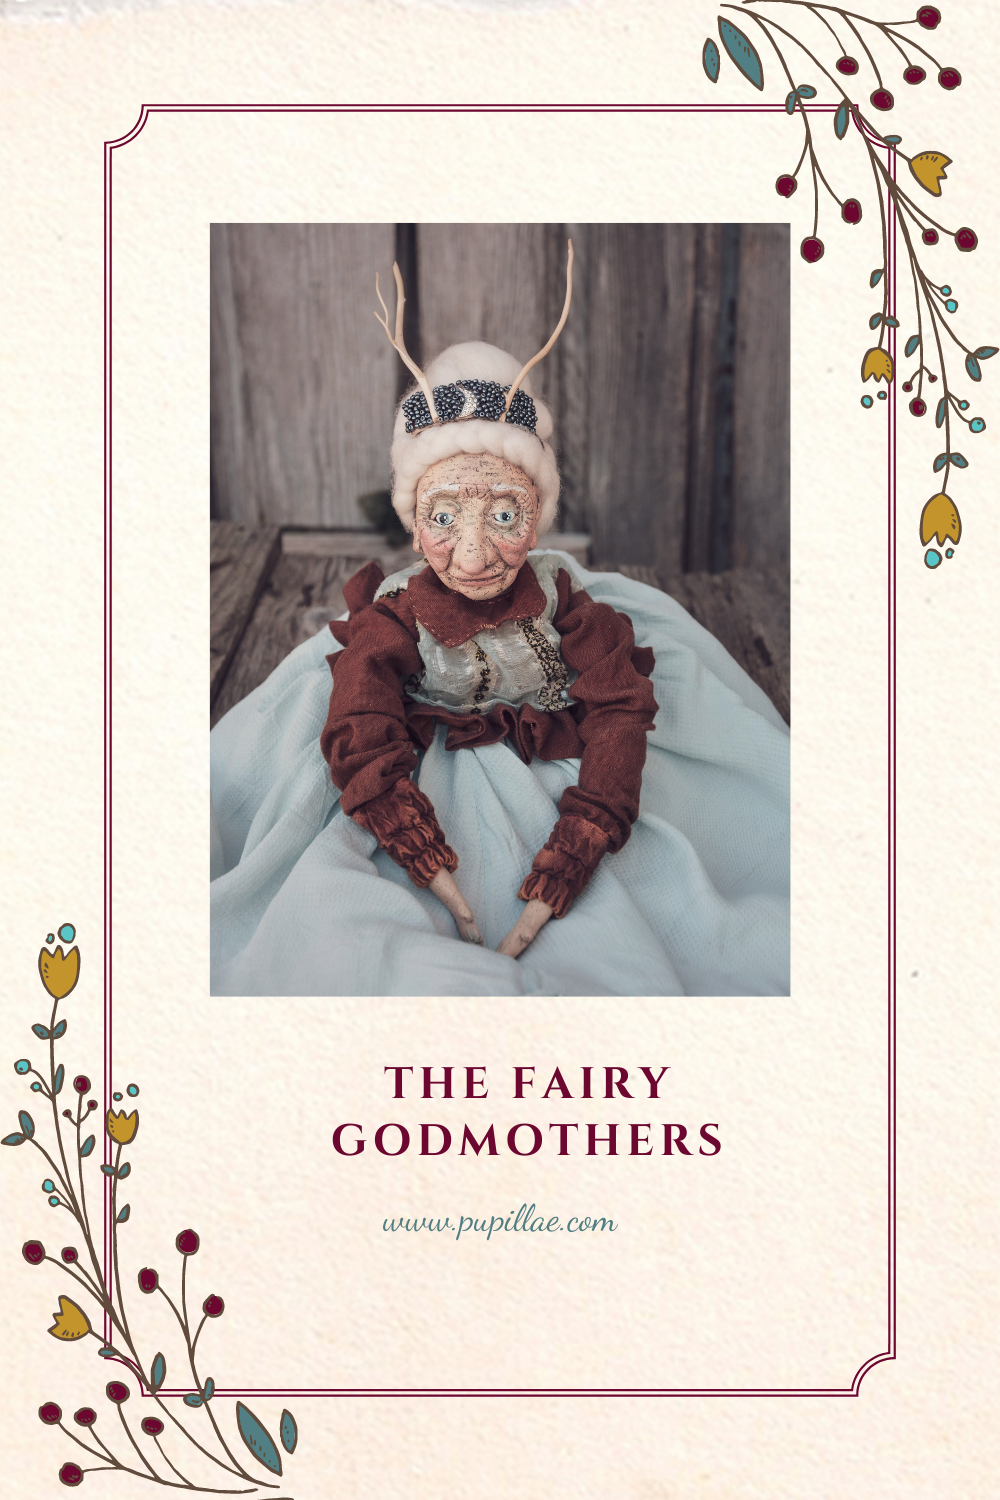 The fairy godmothers